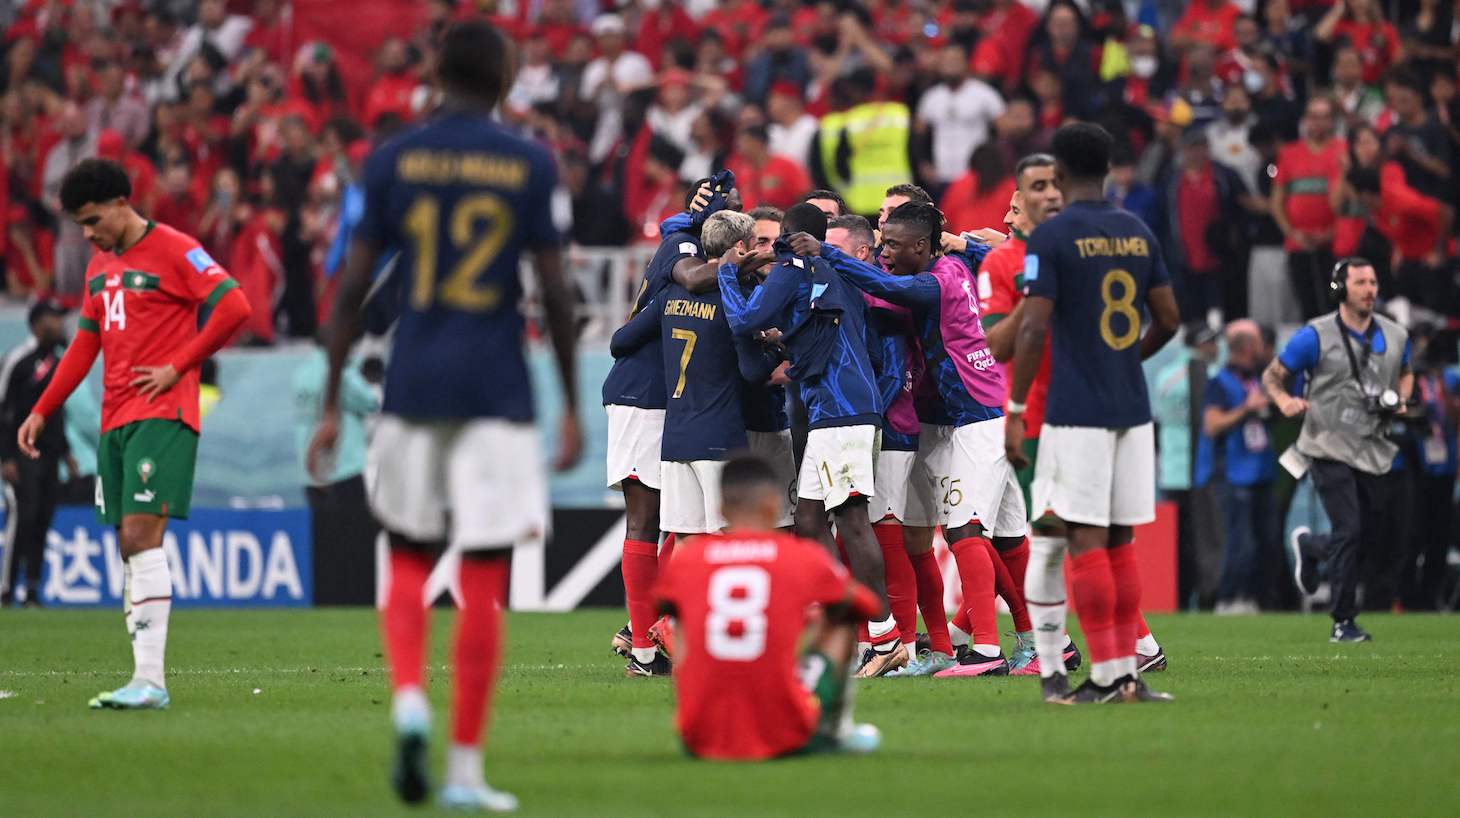 France's players celebrate their victory in the Qatar 2022 World Cup semi-final football match between France and Morocco at the Al-Bayt Stadium in Al Khor, north of Doha on December 14, 2022.